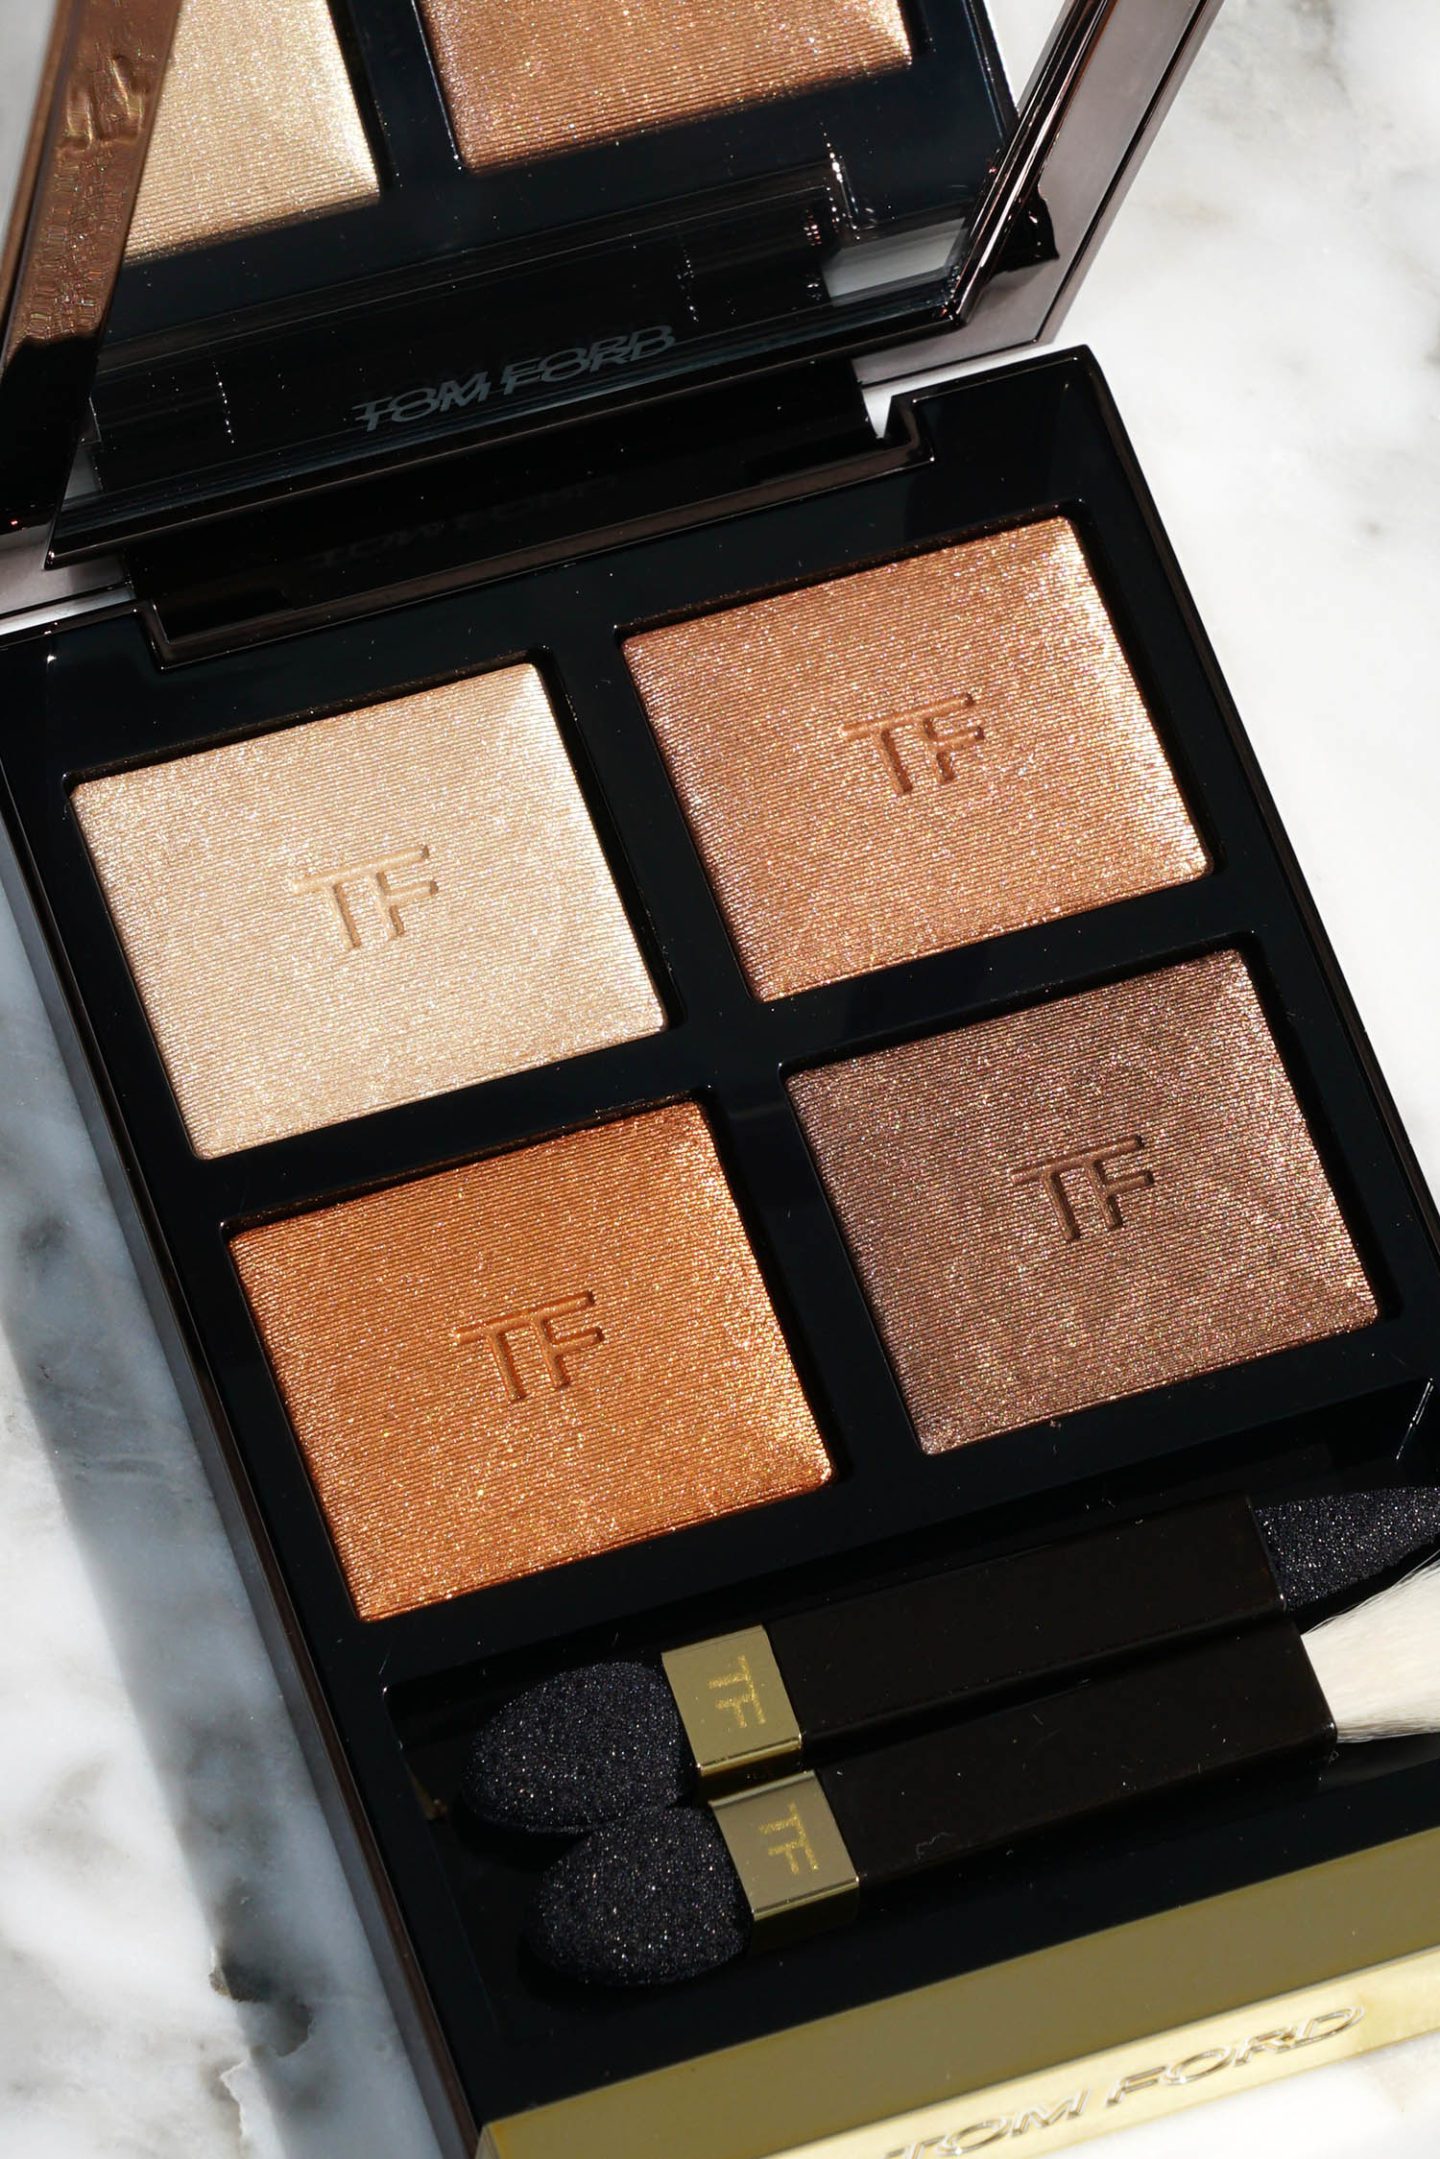 Tom Ford Eye Color Quad Suspicion Review | The Beauty Look Book